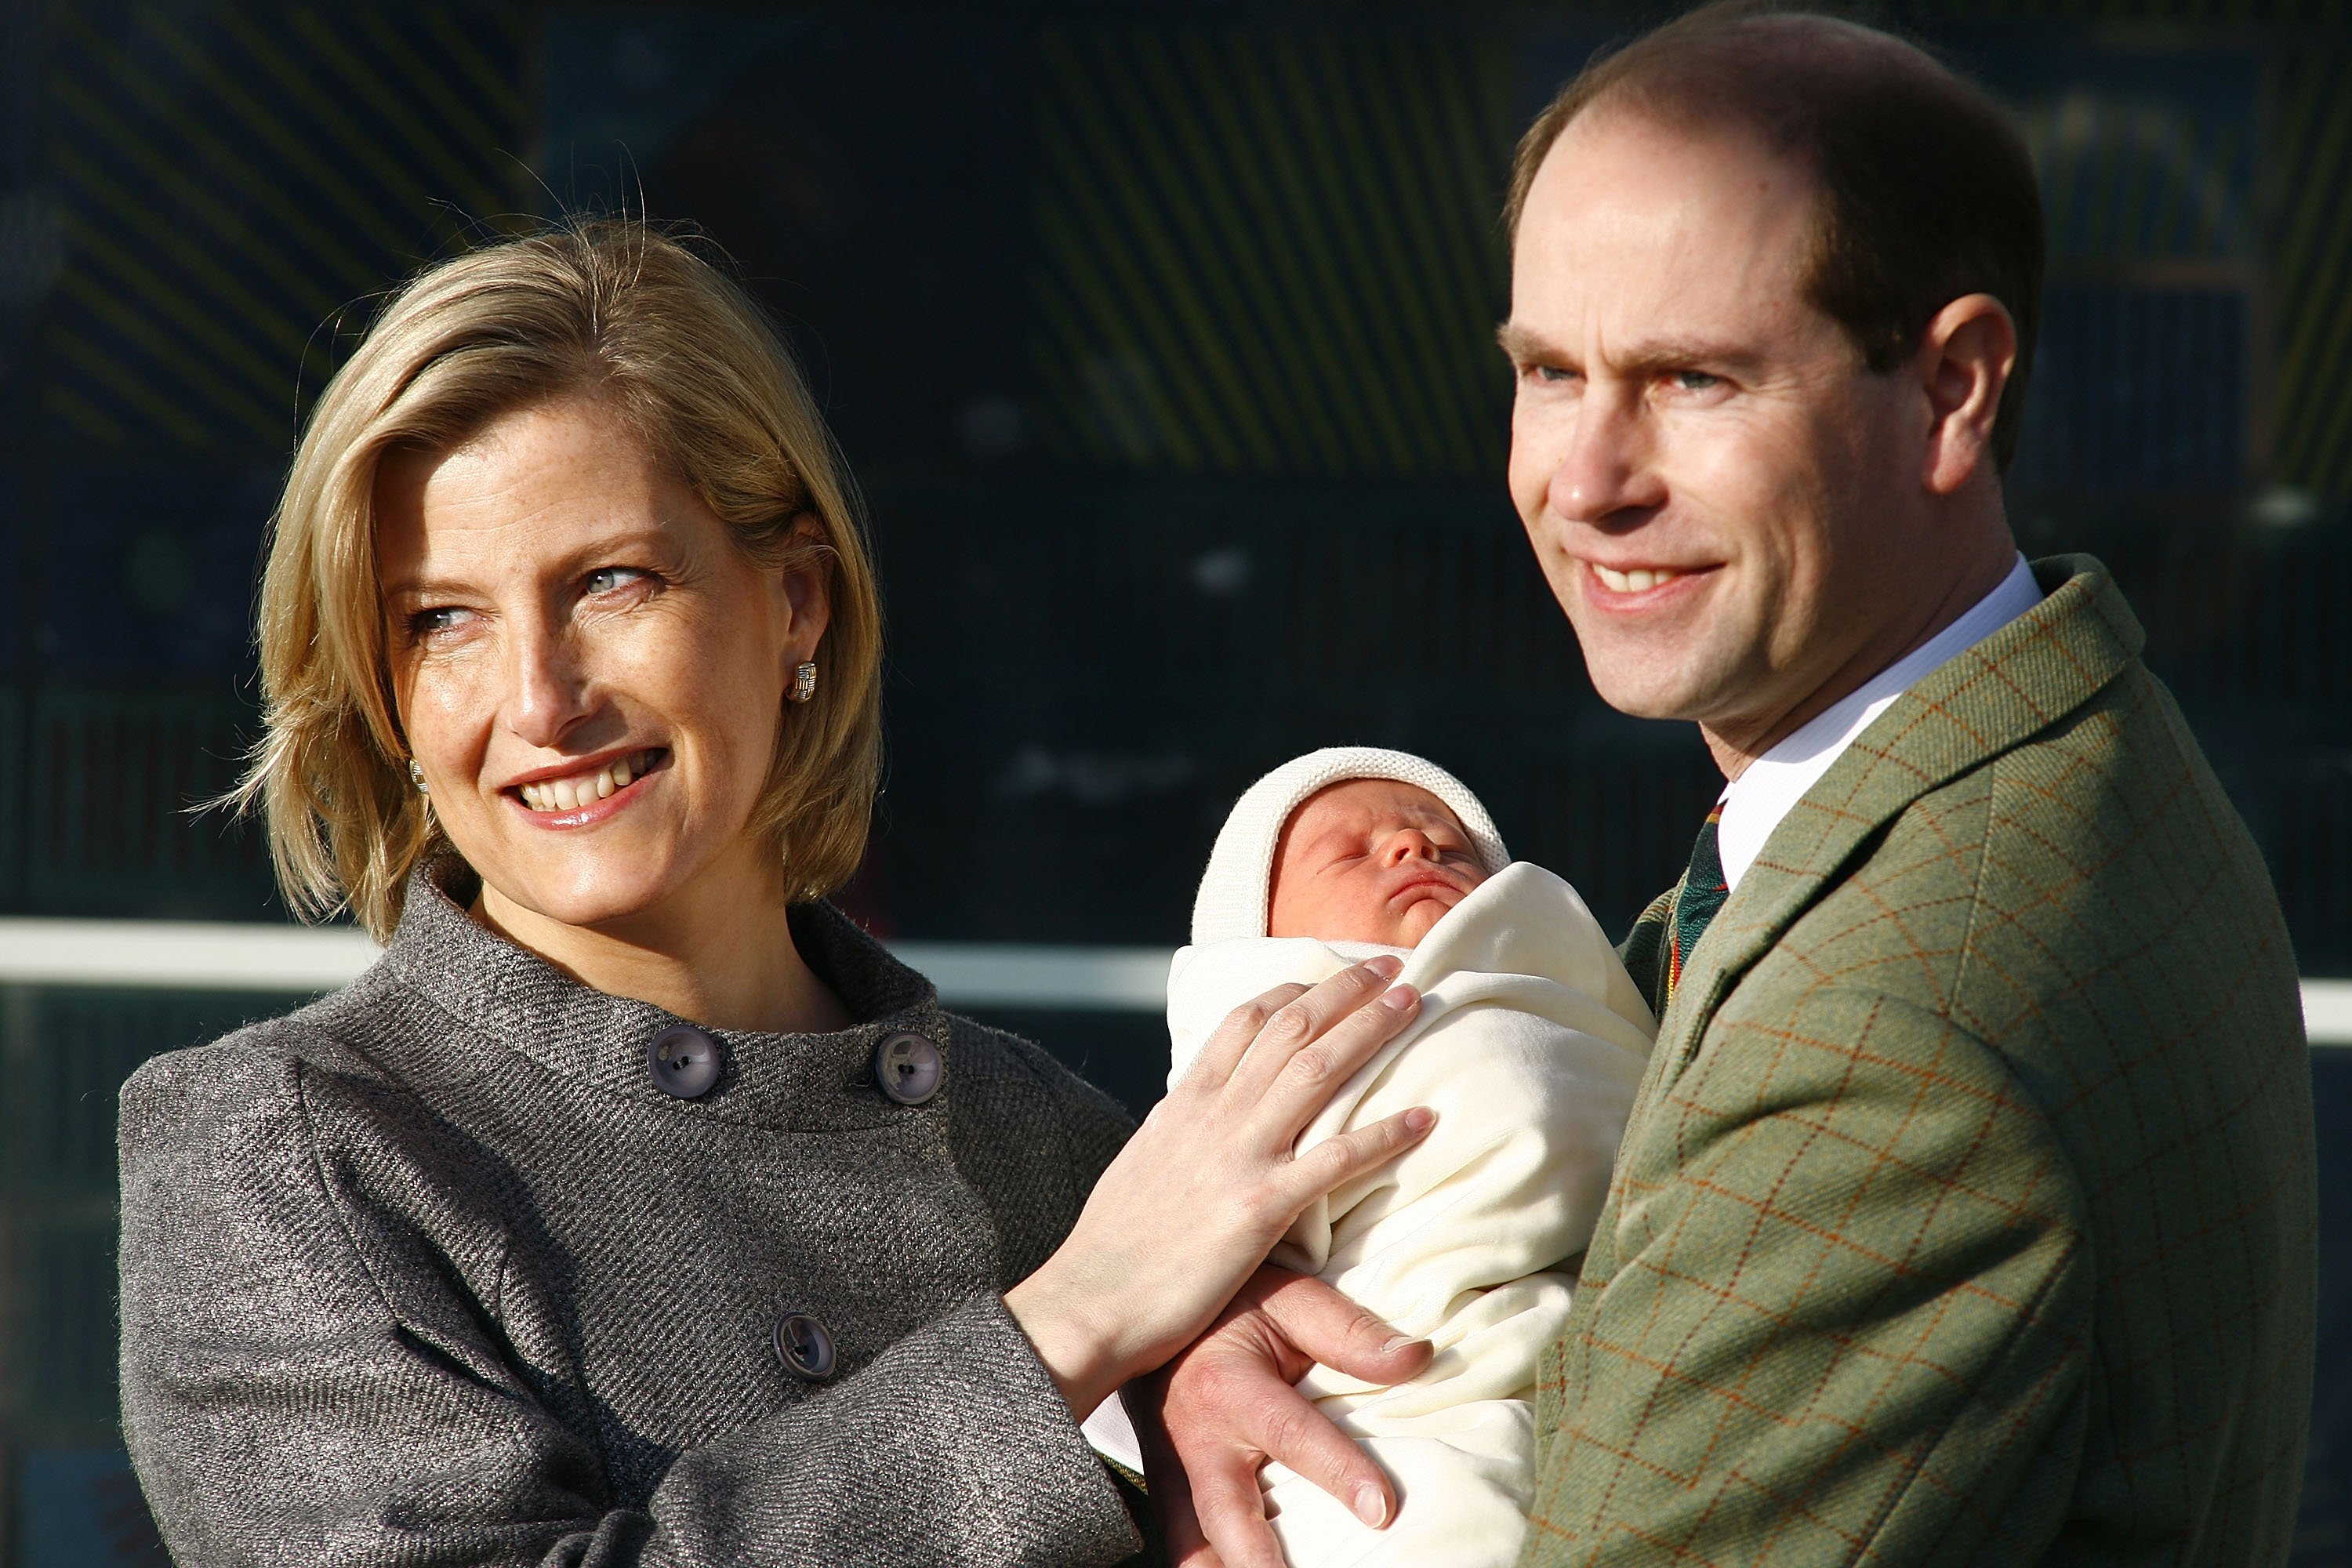 Prince Edward, Earl of Wessex, and Sophie, Countess of Wessex, smile with their son, James Viscount Severn, at Frimley Park Hospital on December 20, 2007, in Frimley, England. | Source: Getty Images